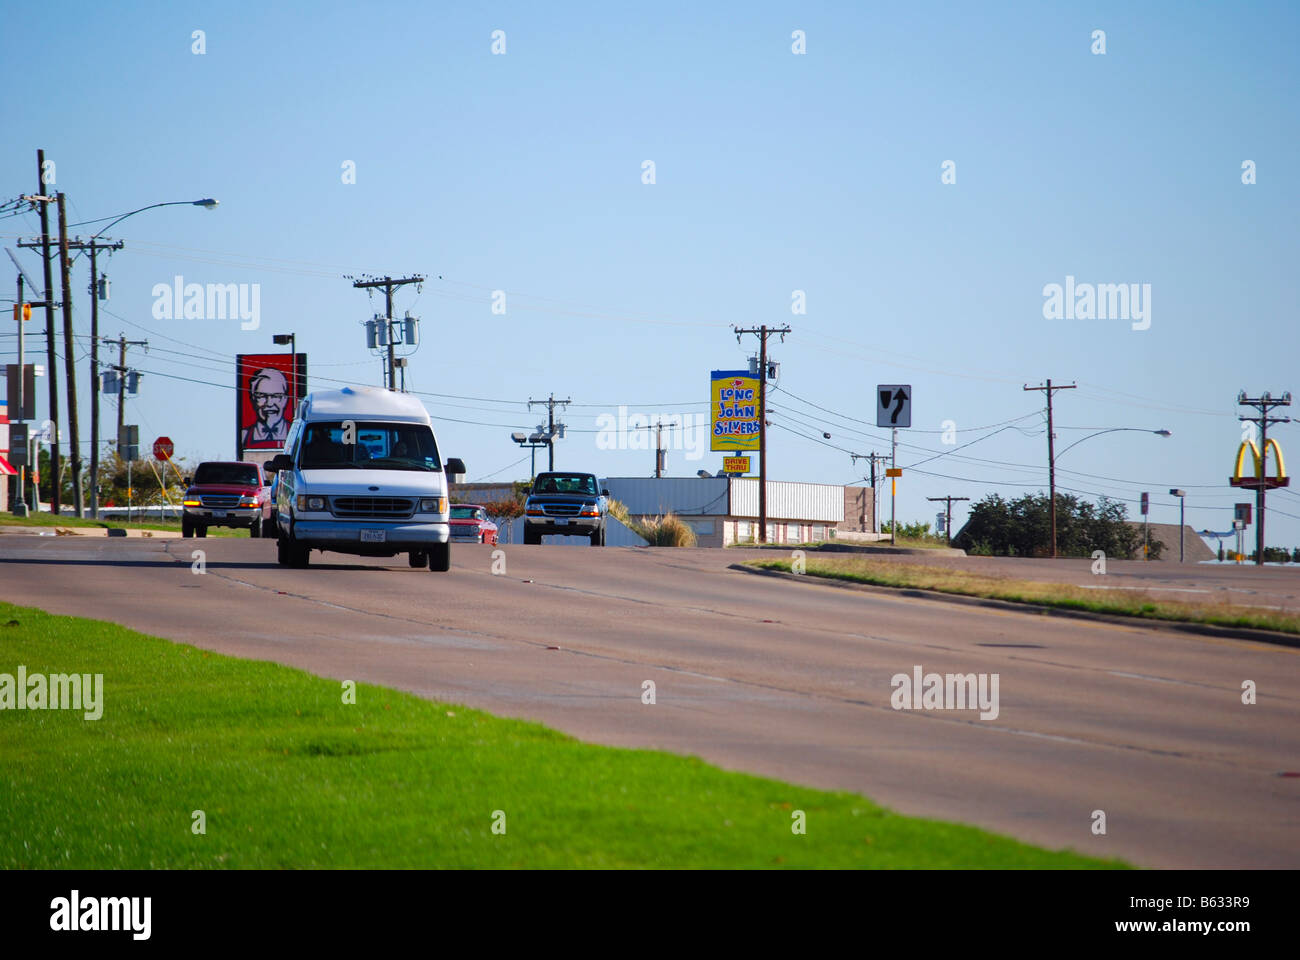 Traffic on Highway 10 in Euless, Texas Stock Photo